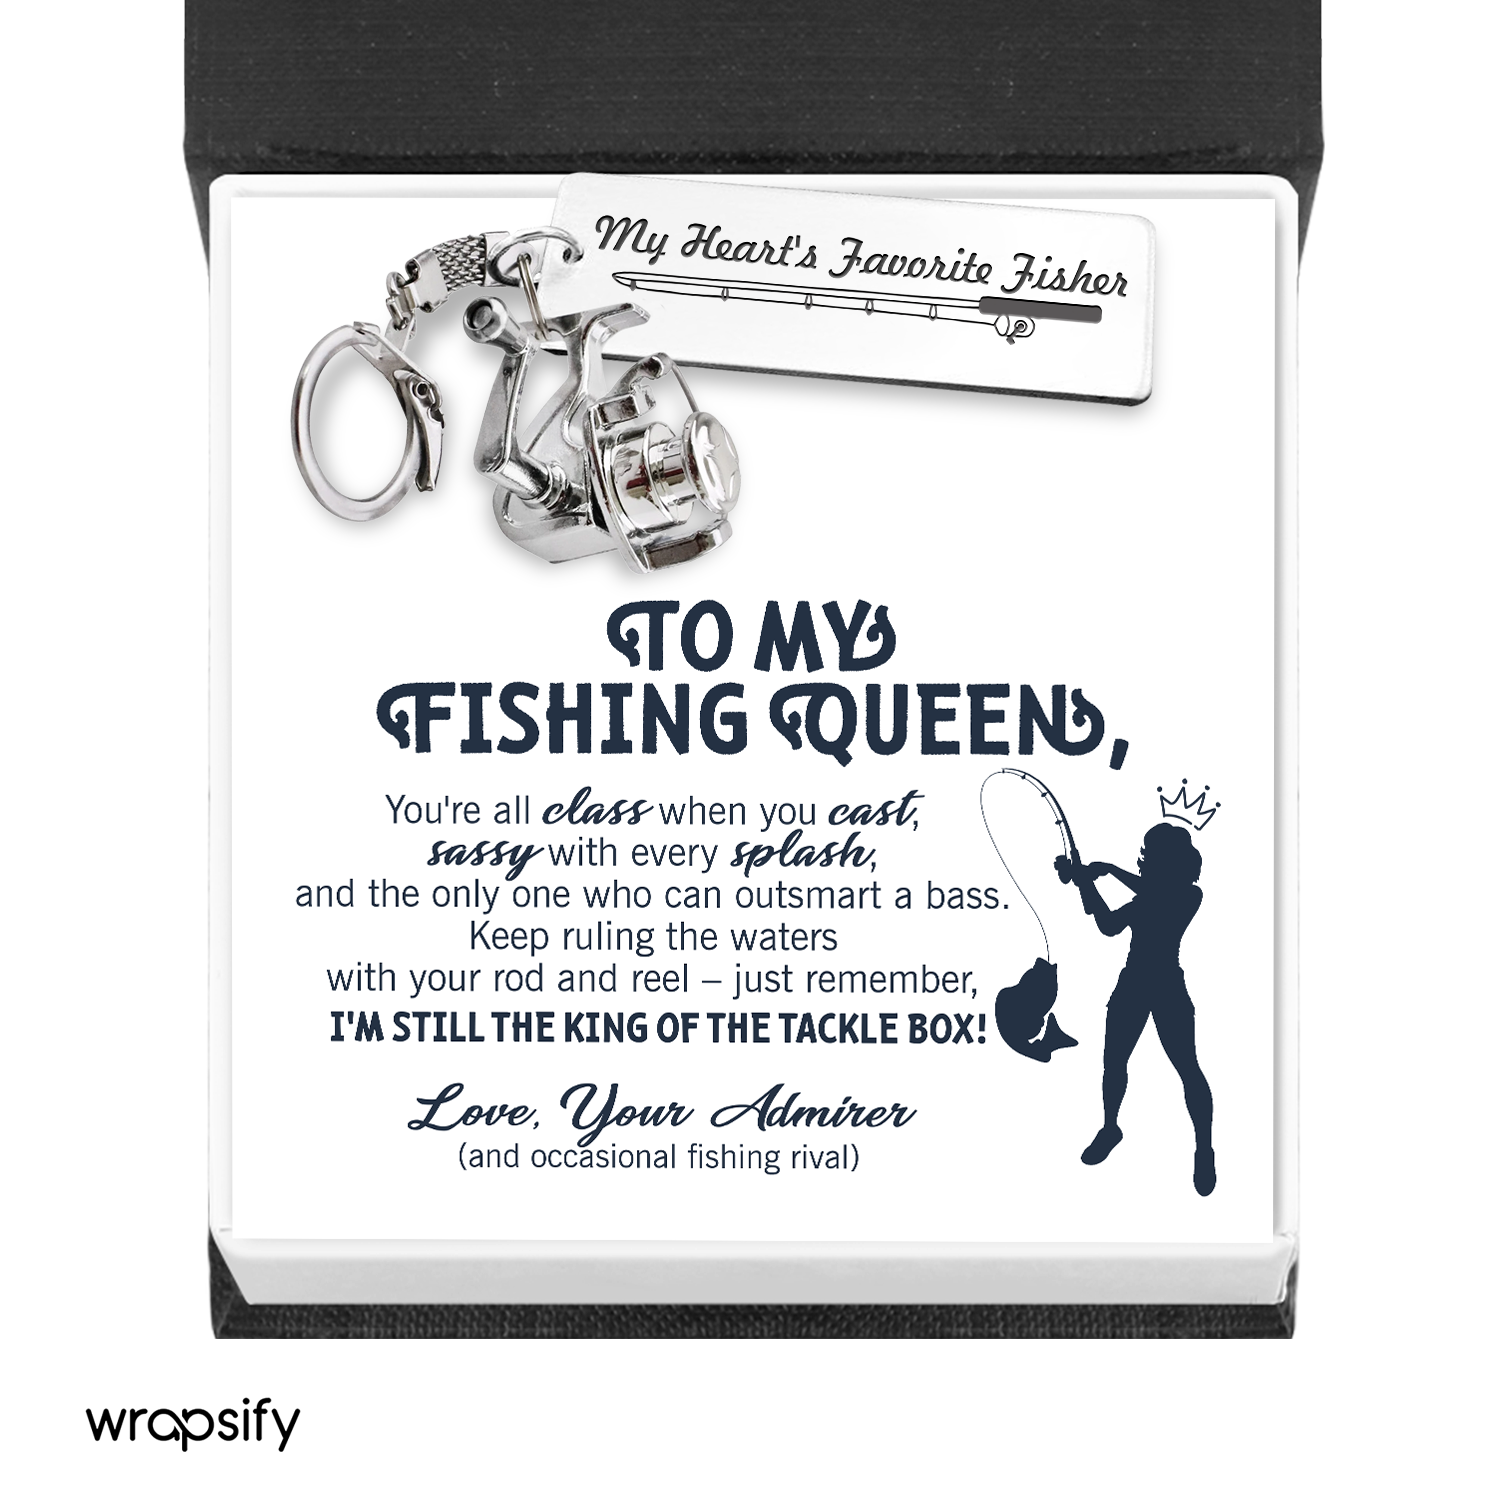 100 Best Fishing Gifts For Wife - Wrapsify